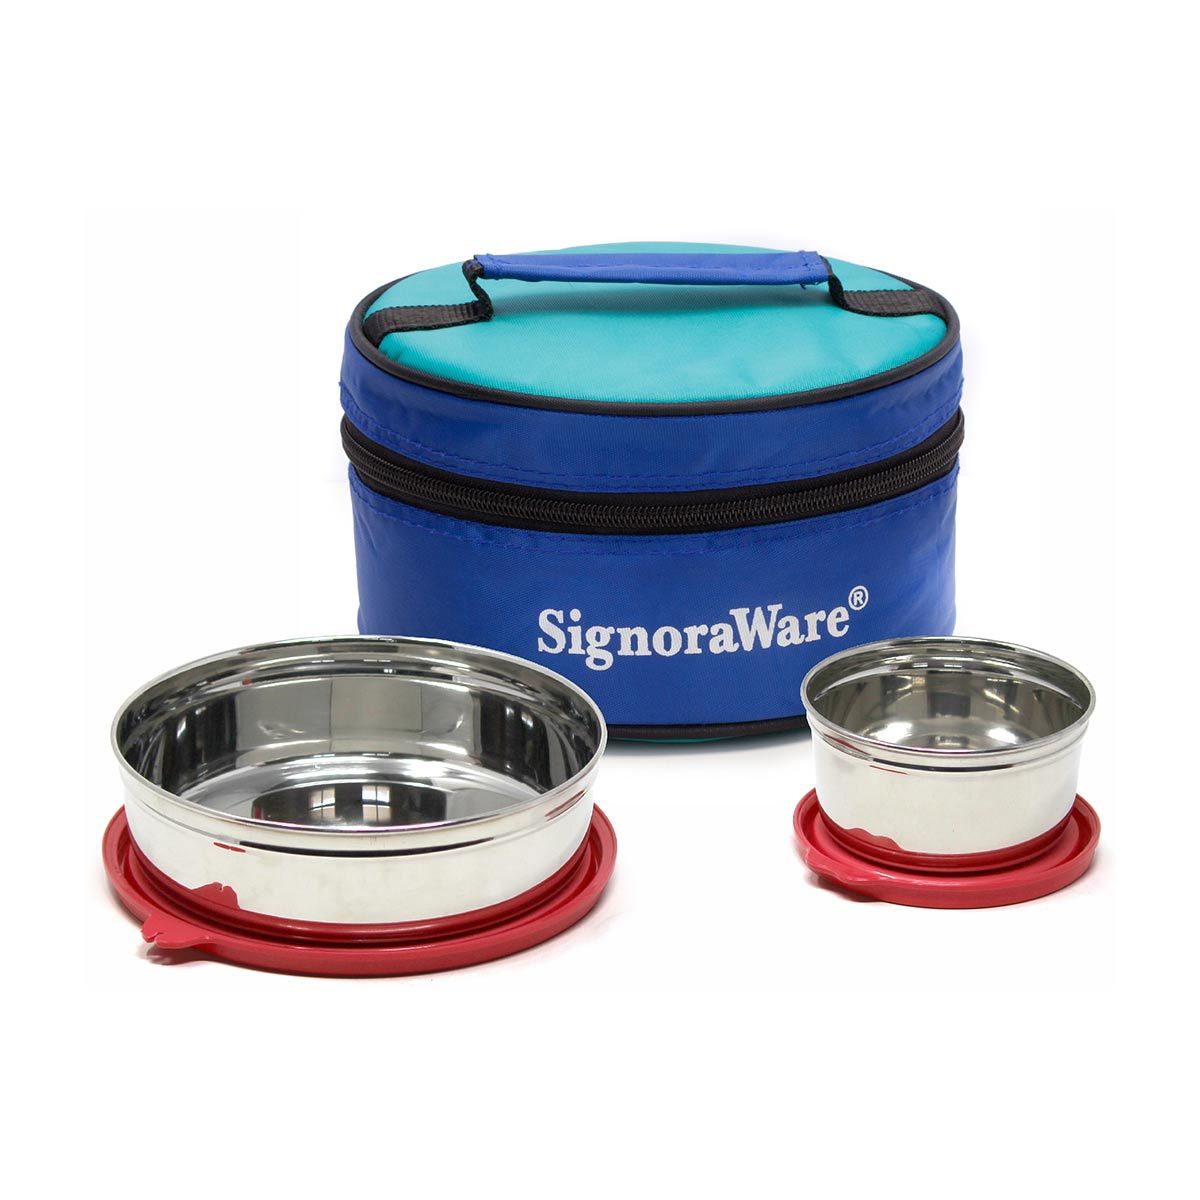 Signoraware Classic Steel Stainless Steel Lunch Box with Bag